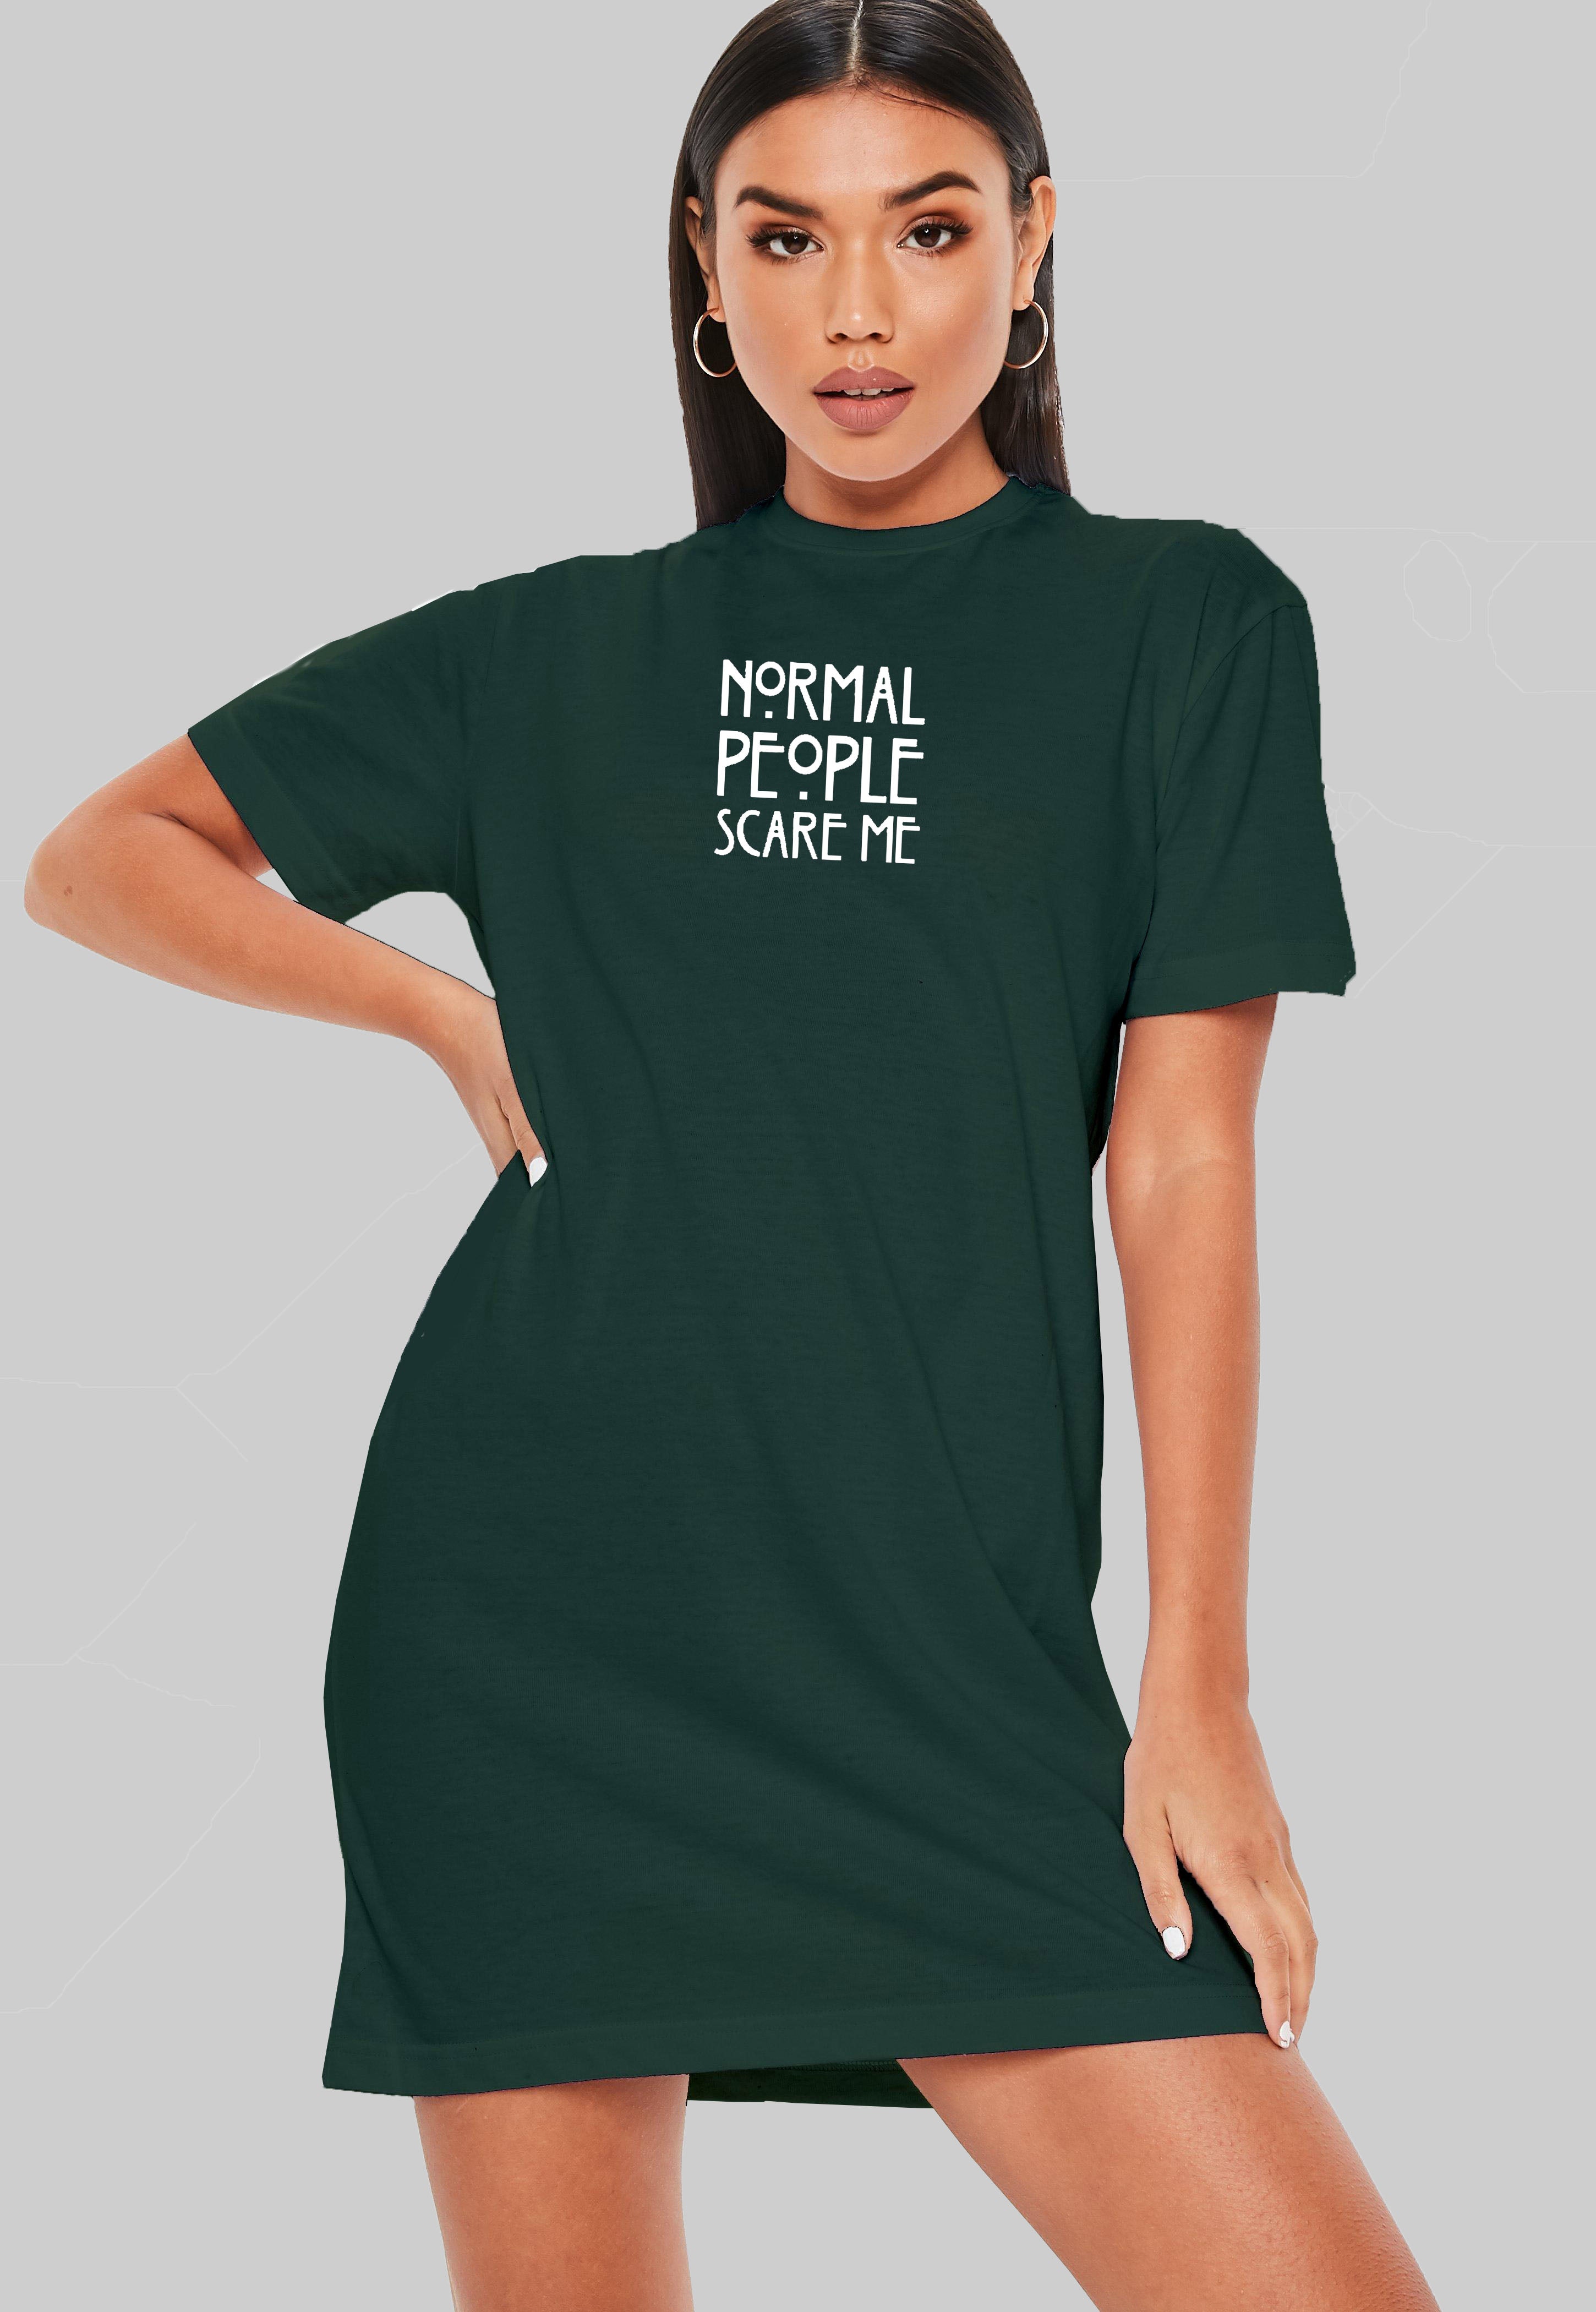 Normal People Scare Me T-Shirt Dress